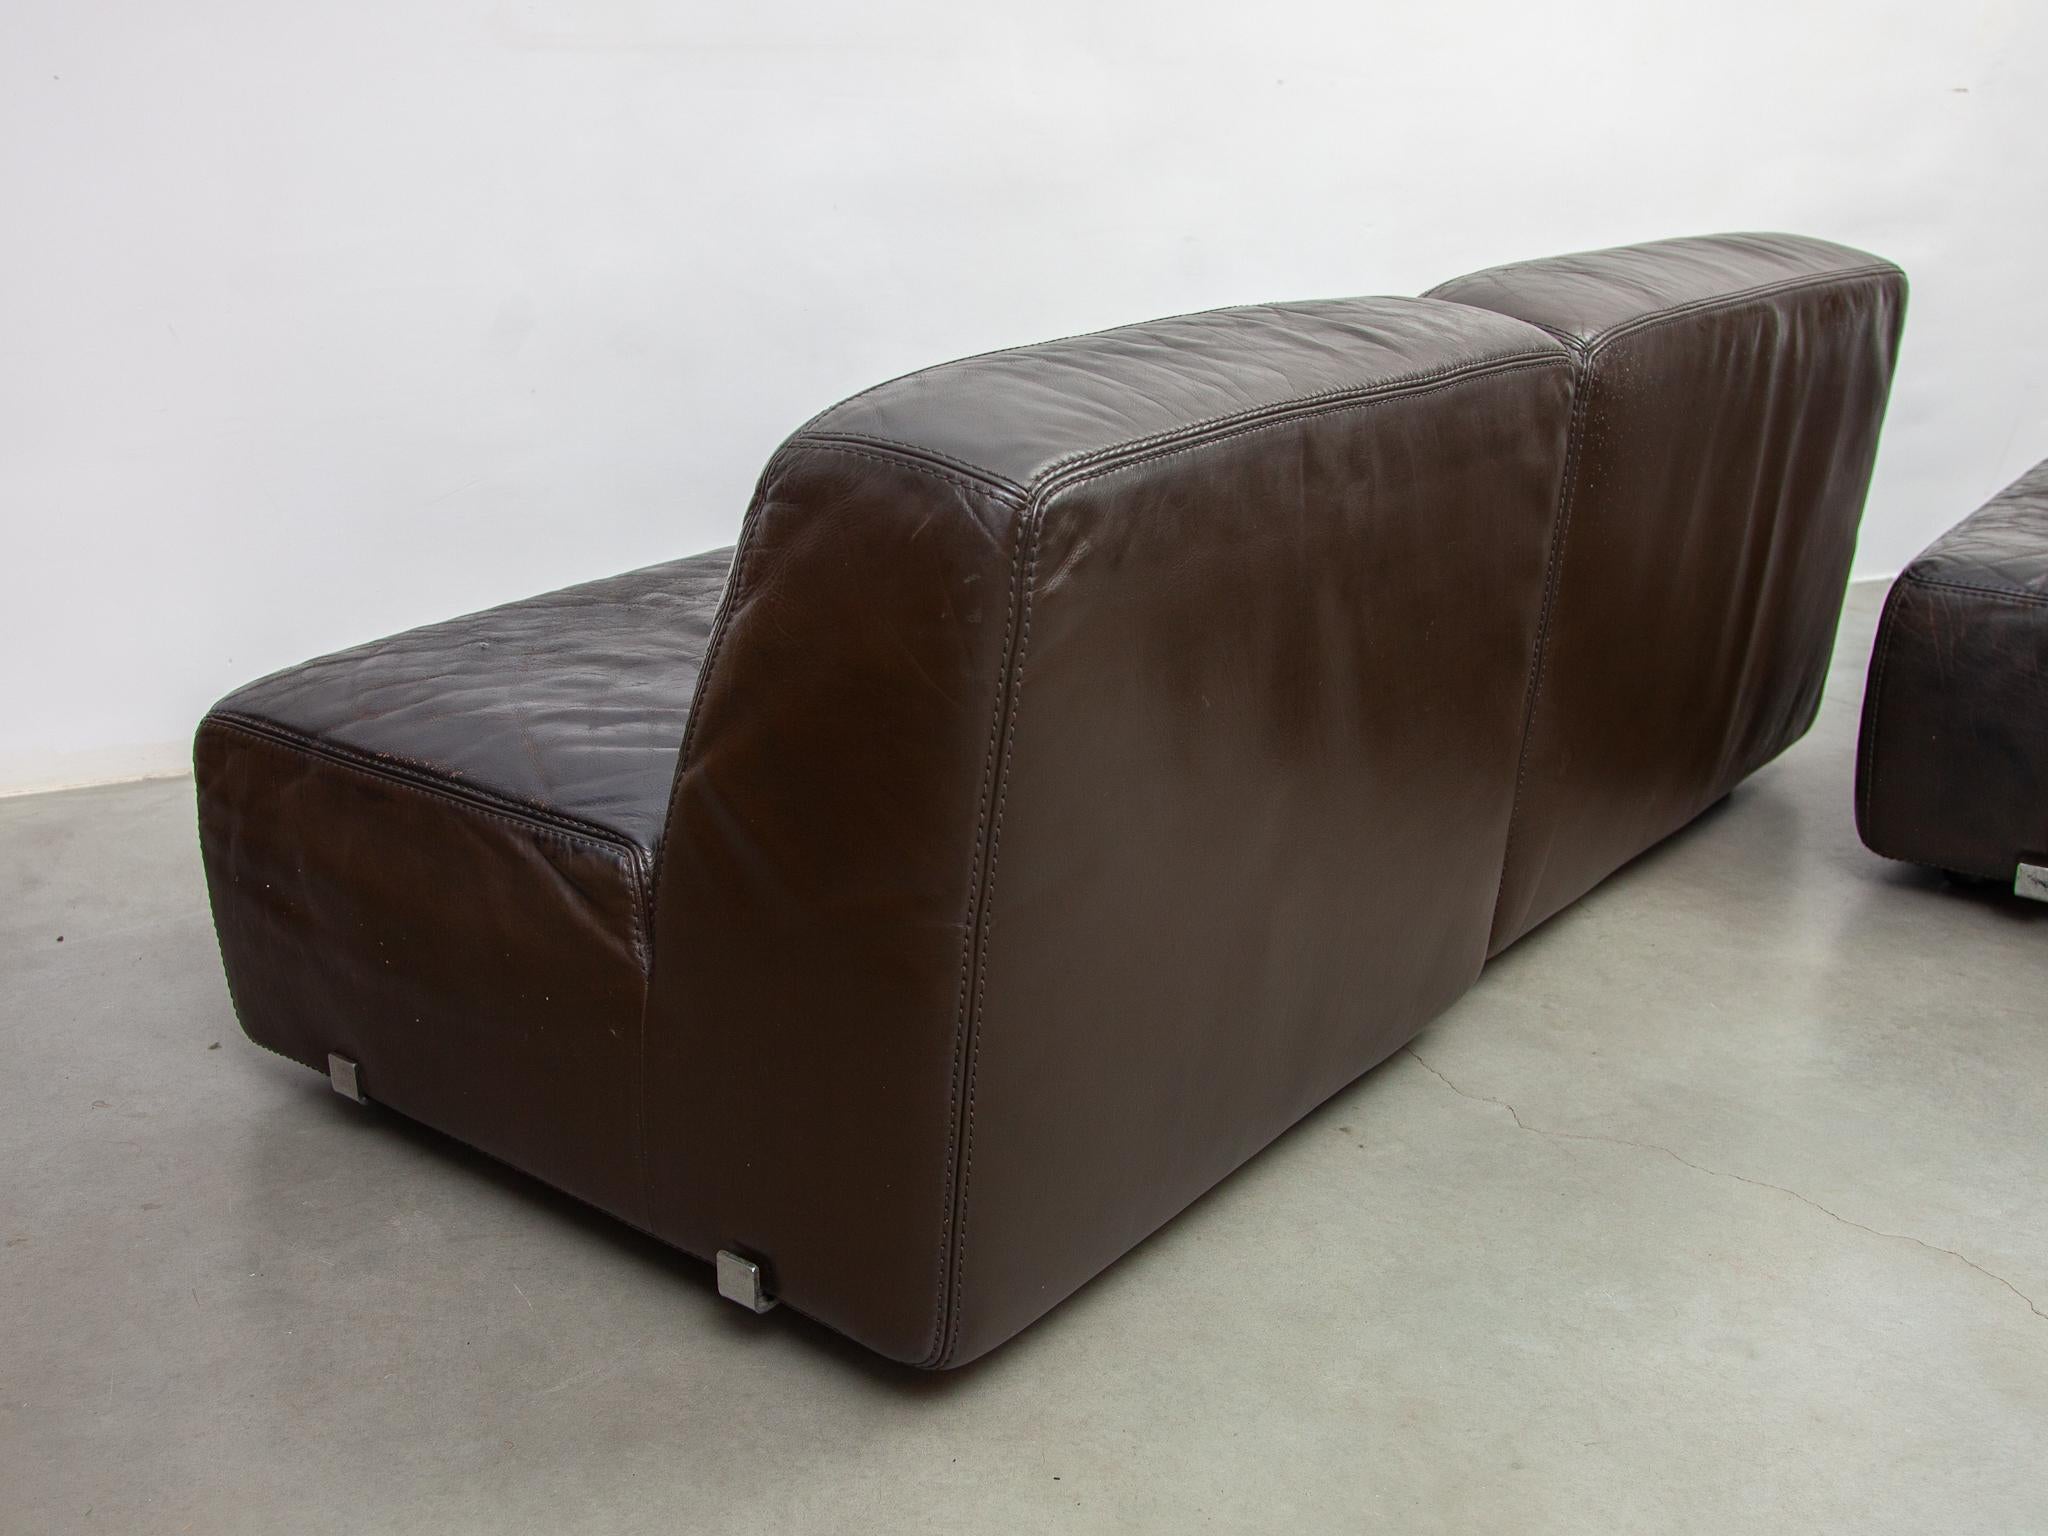 Modular Sofa 1970s Brown Leather designed by Durlet For Sale 2